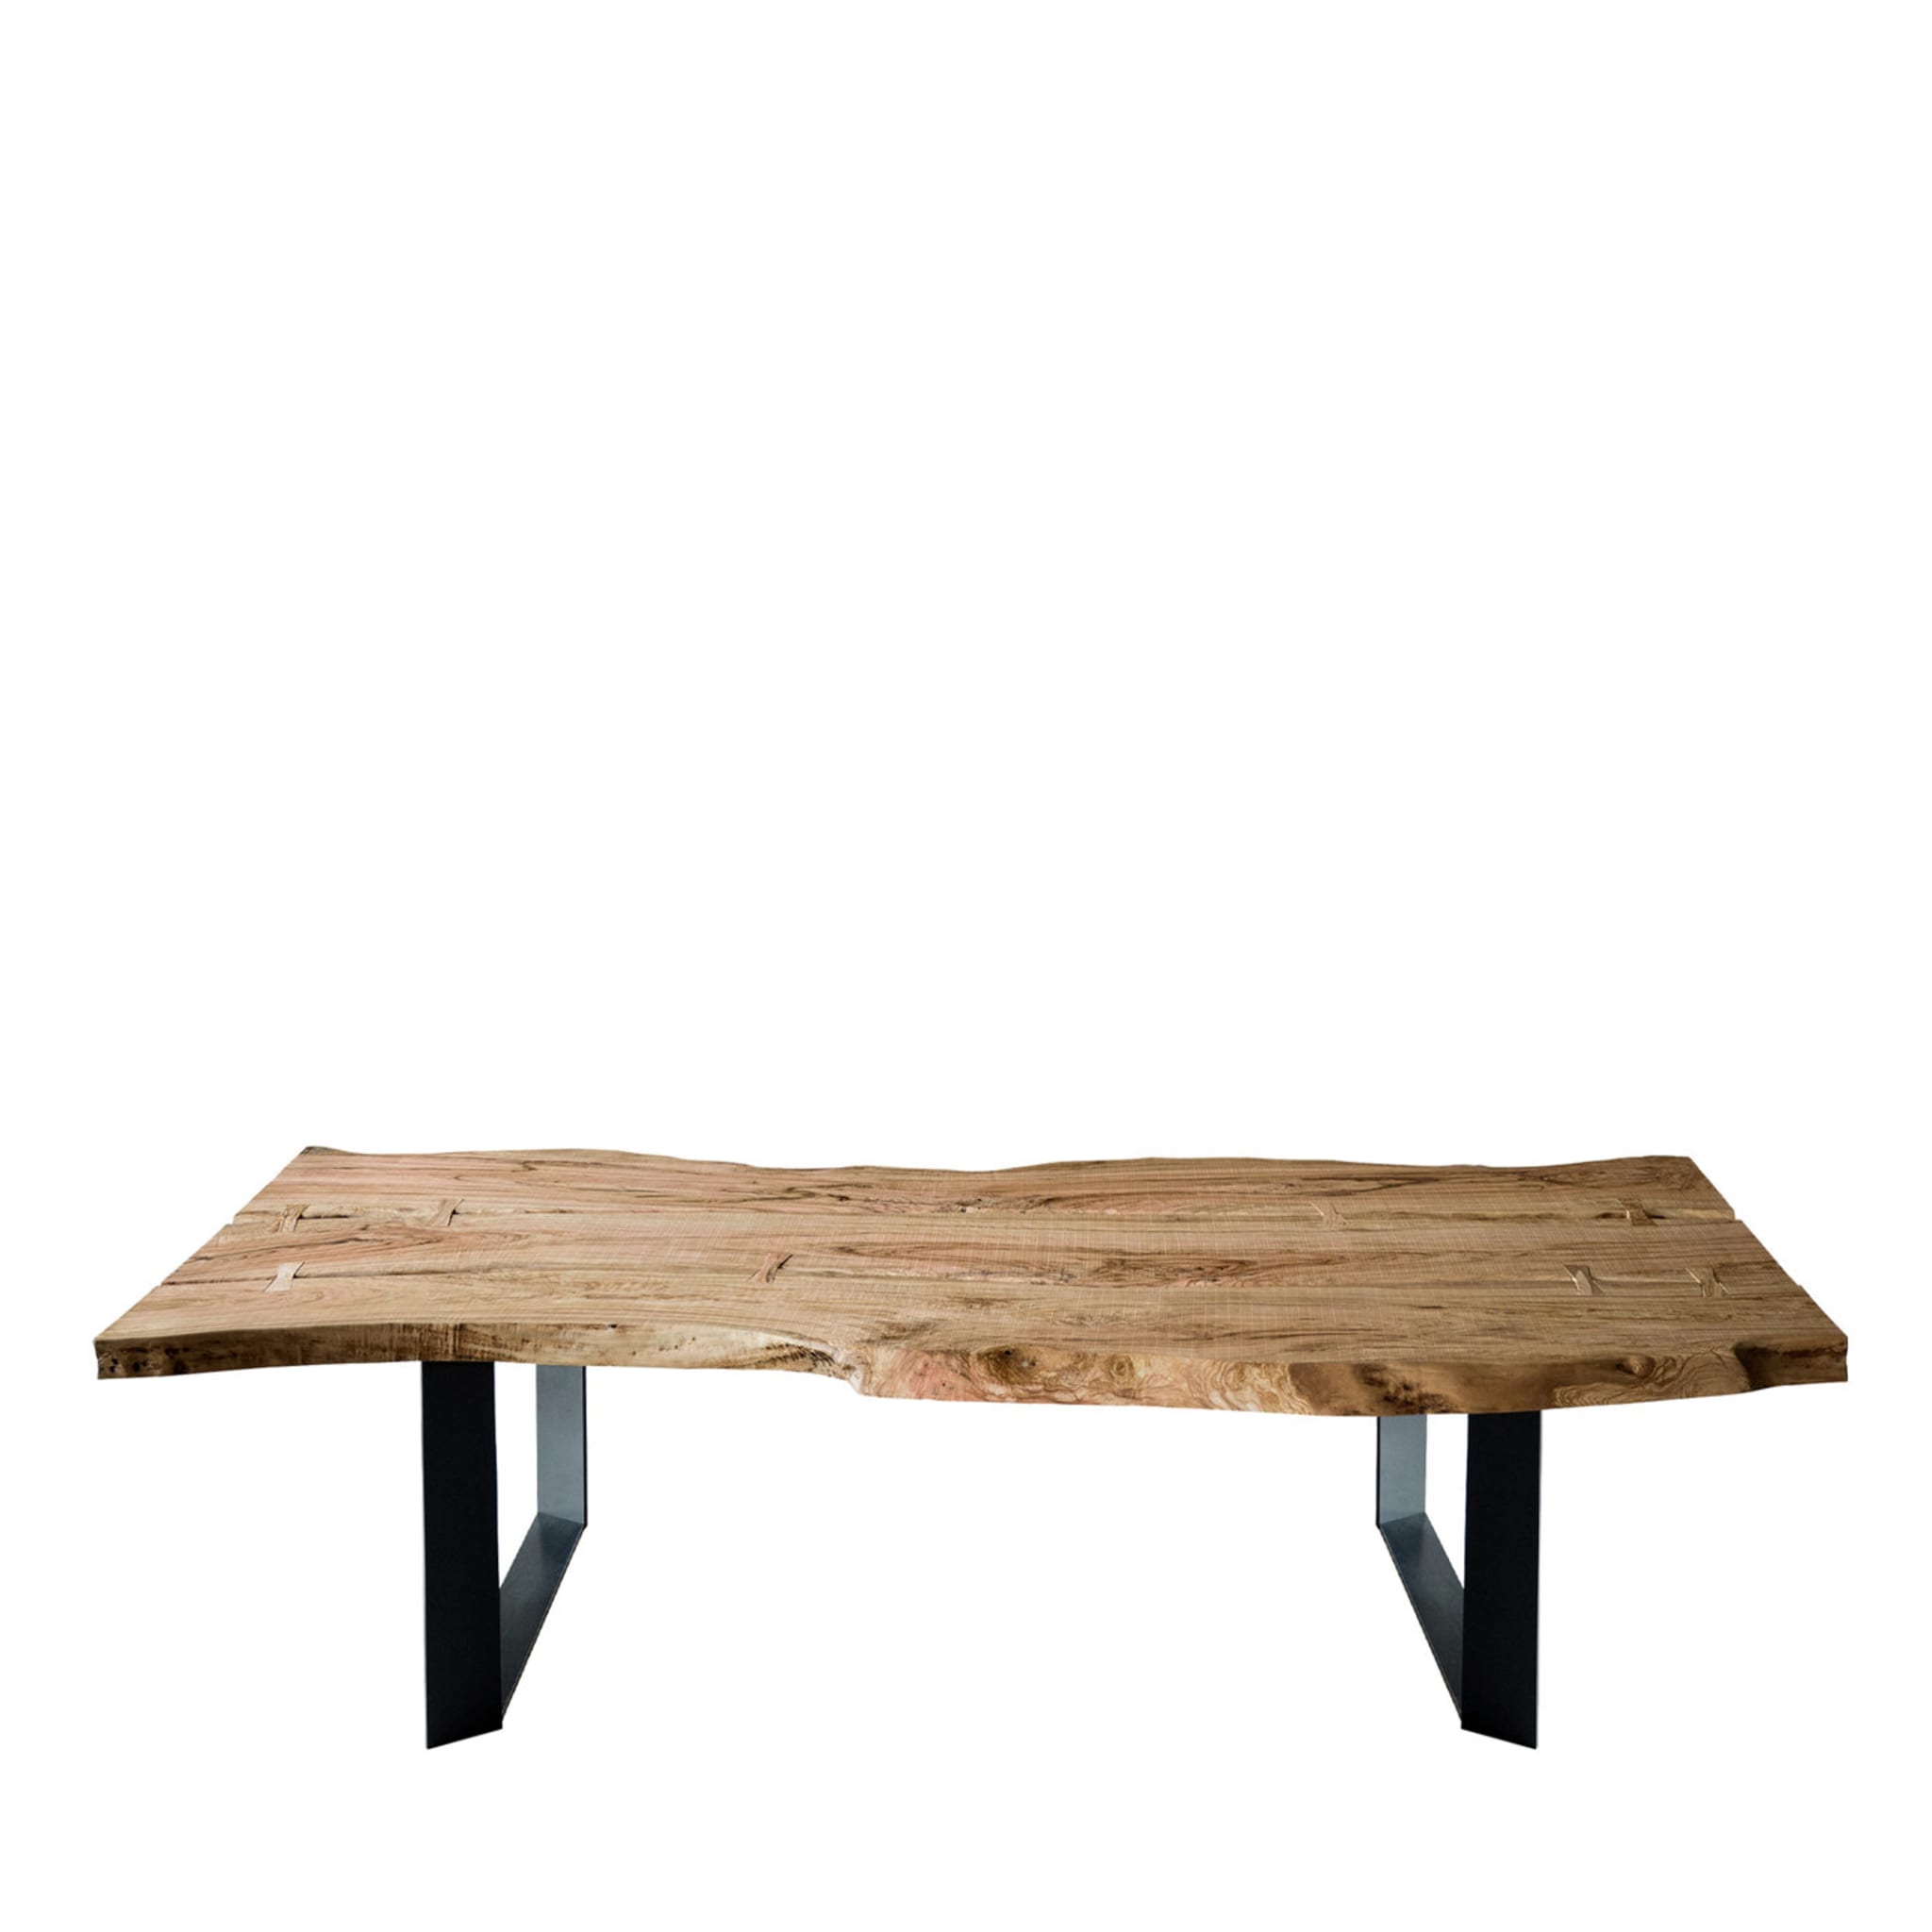 Inulivo Wood 3-Piece Dining Table